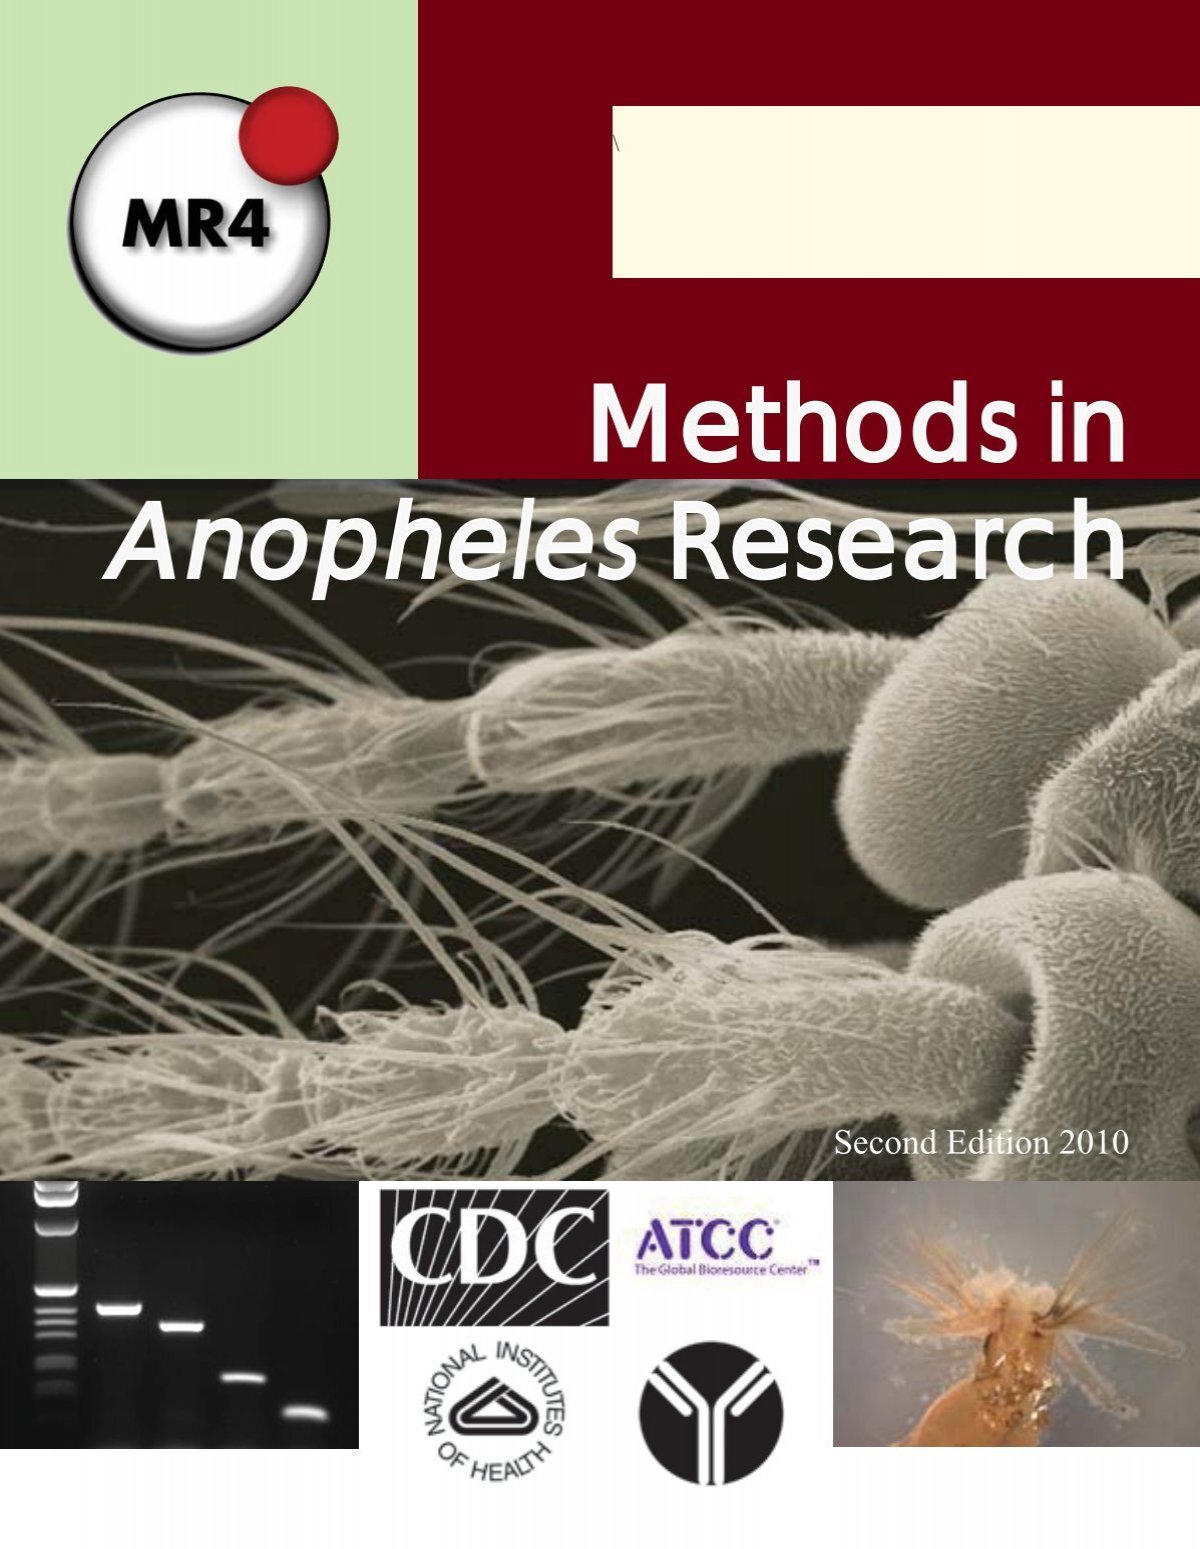 Methods in Anopheles Research - MR4